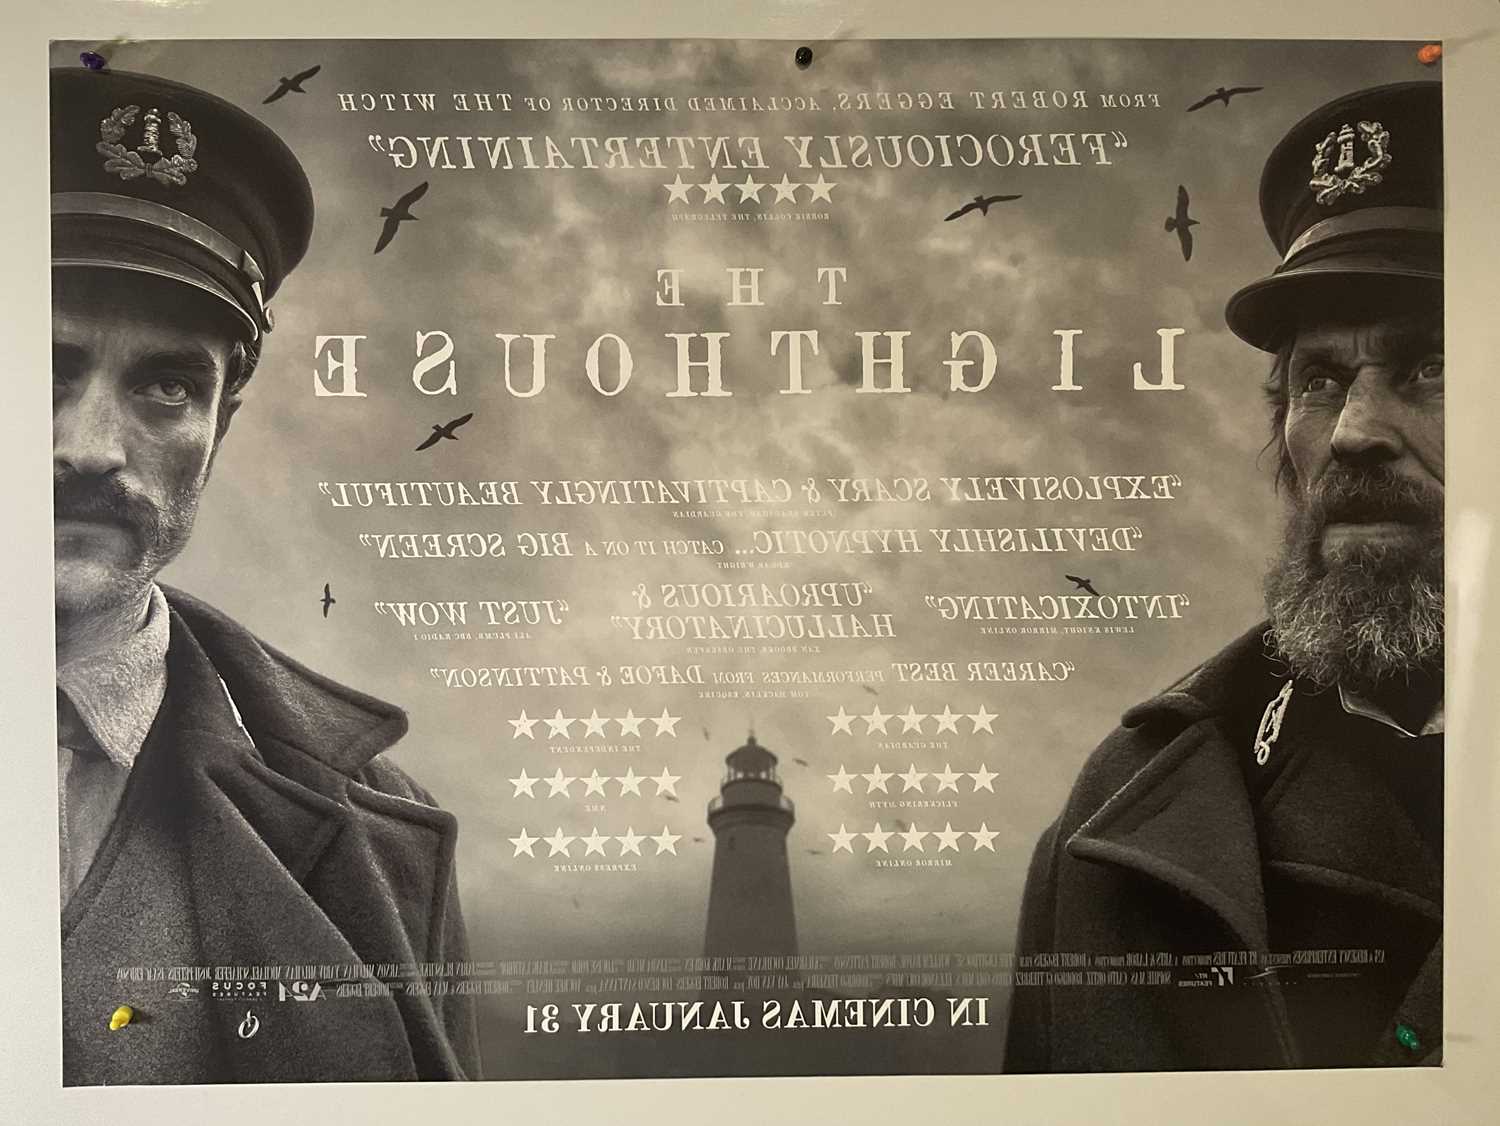 THE LIGHTHOUSE (2019) UK Quad film poster, nautical mystery thriller starring Willem Defoe and - Image 6 of 6